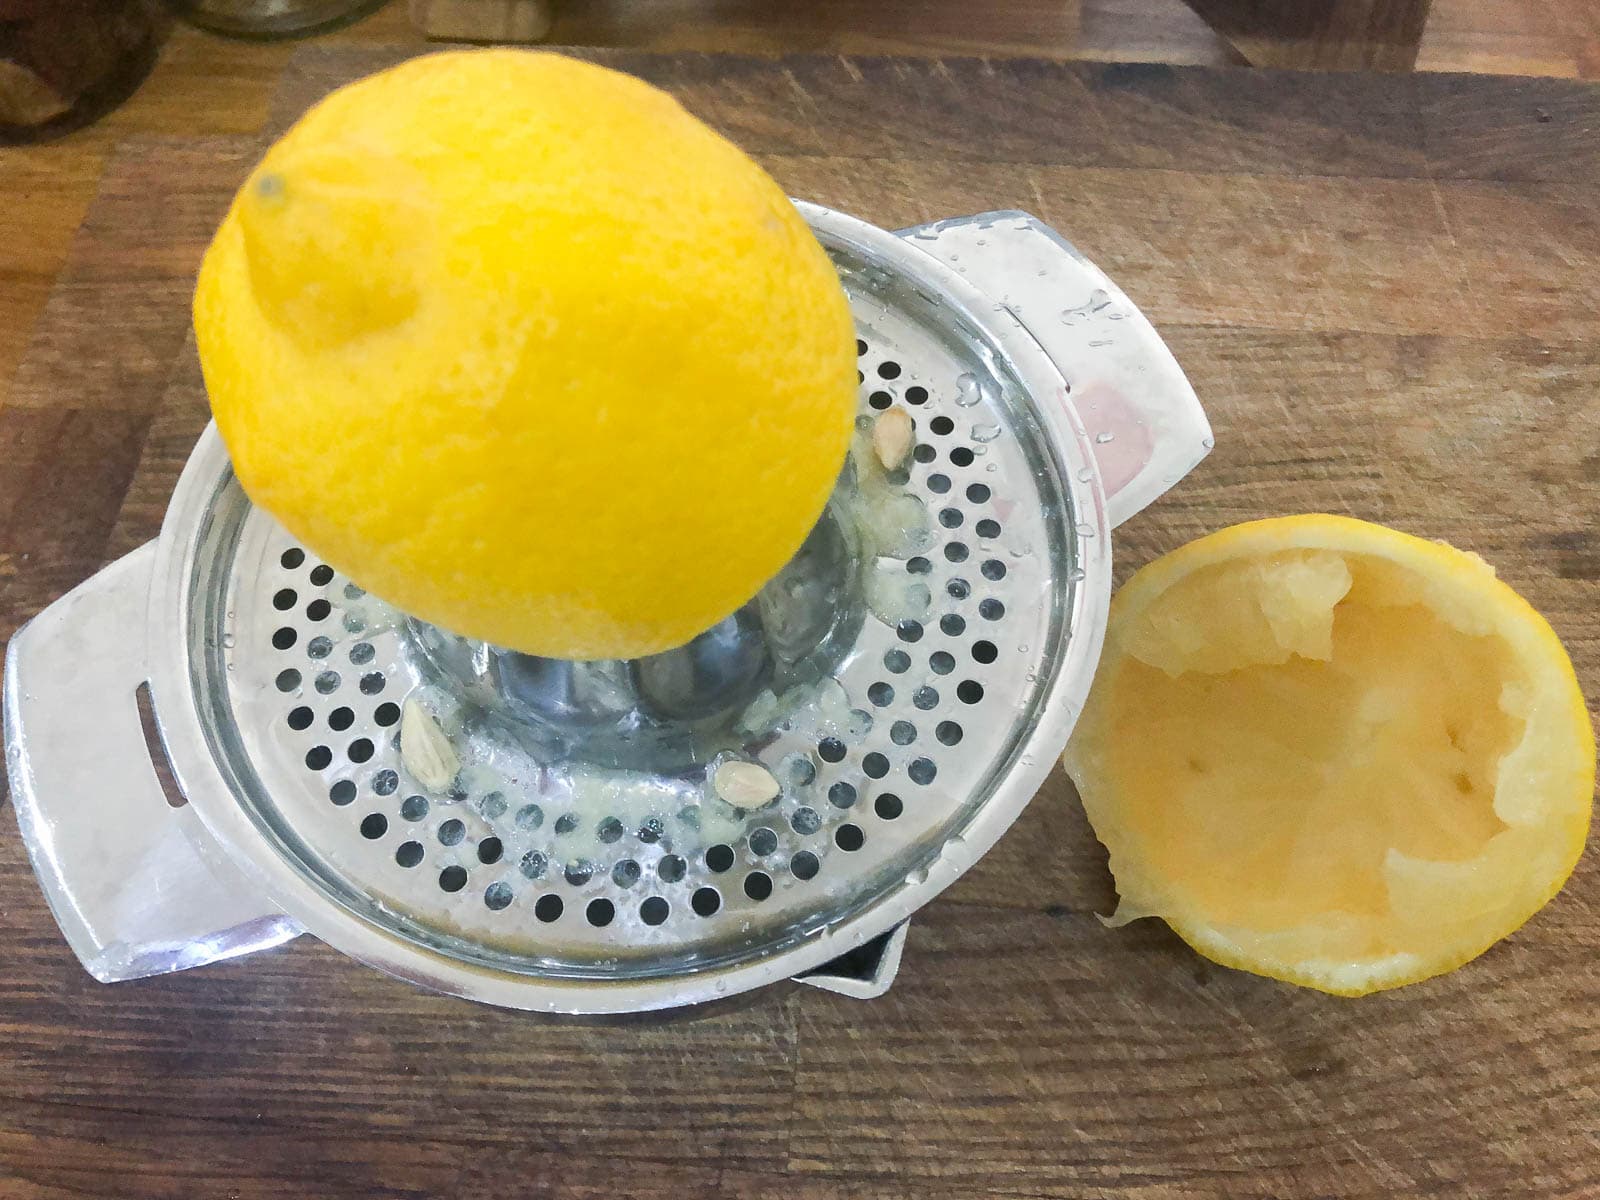 Lemon juiced on a metal juicer sitting on a wooden chopping board.